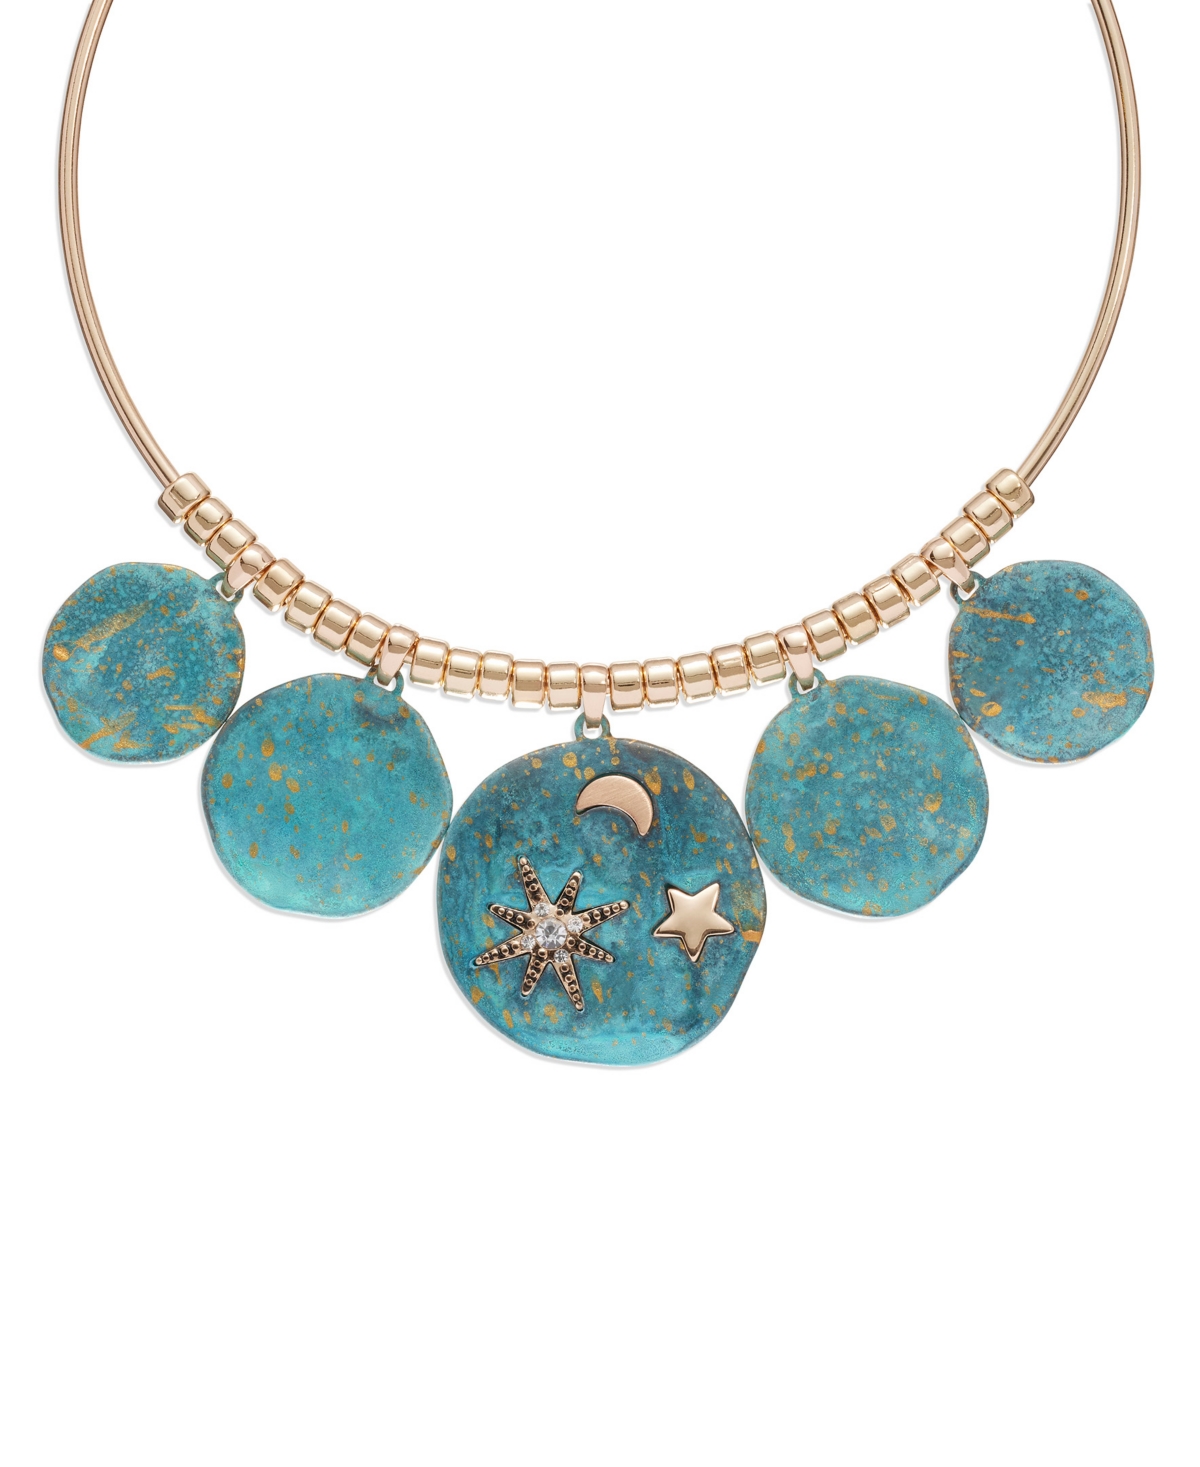 Women's Celestial Patina Wire Necklace - Green Patina